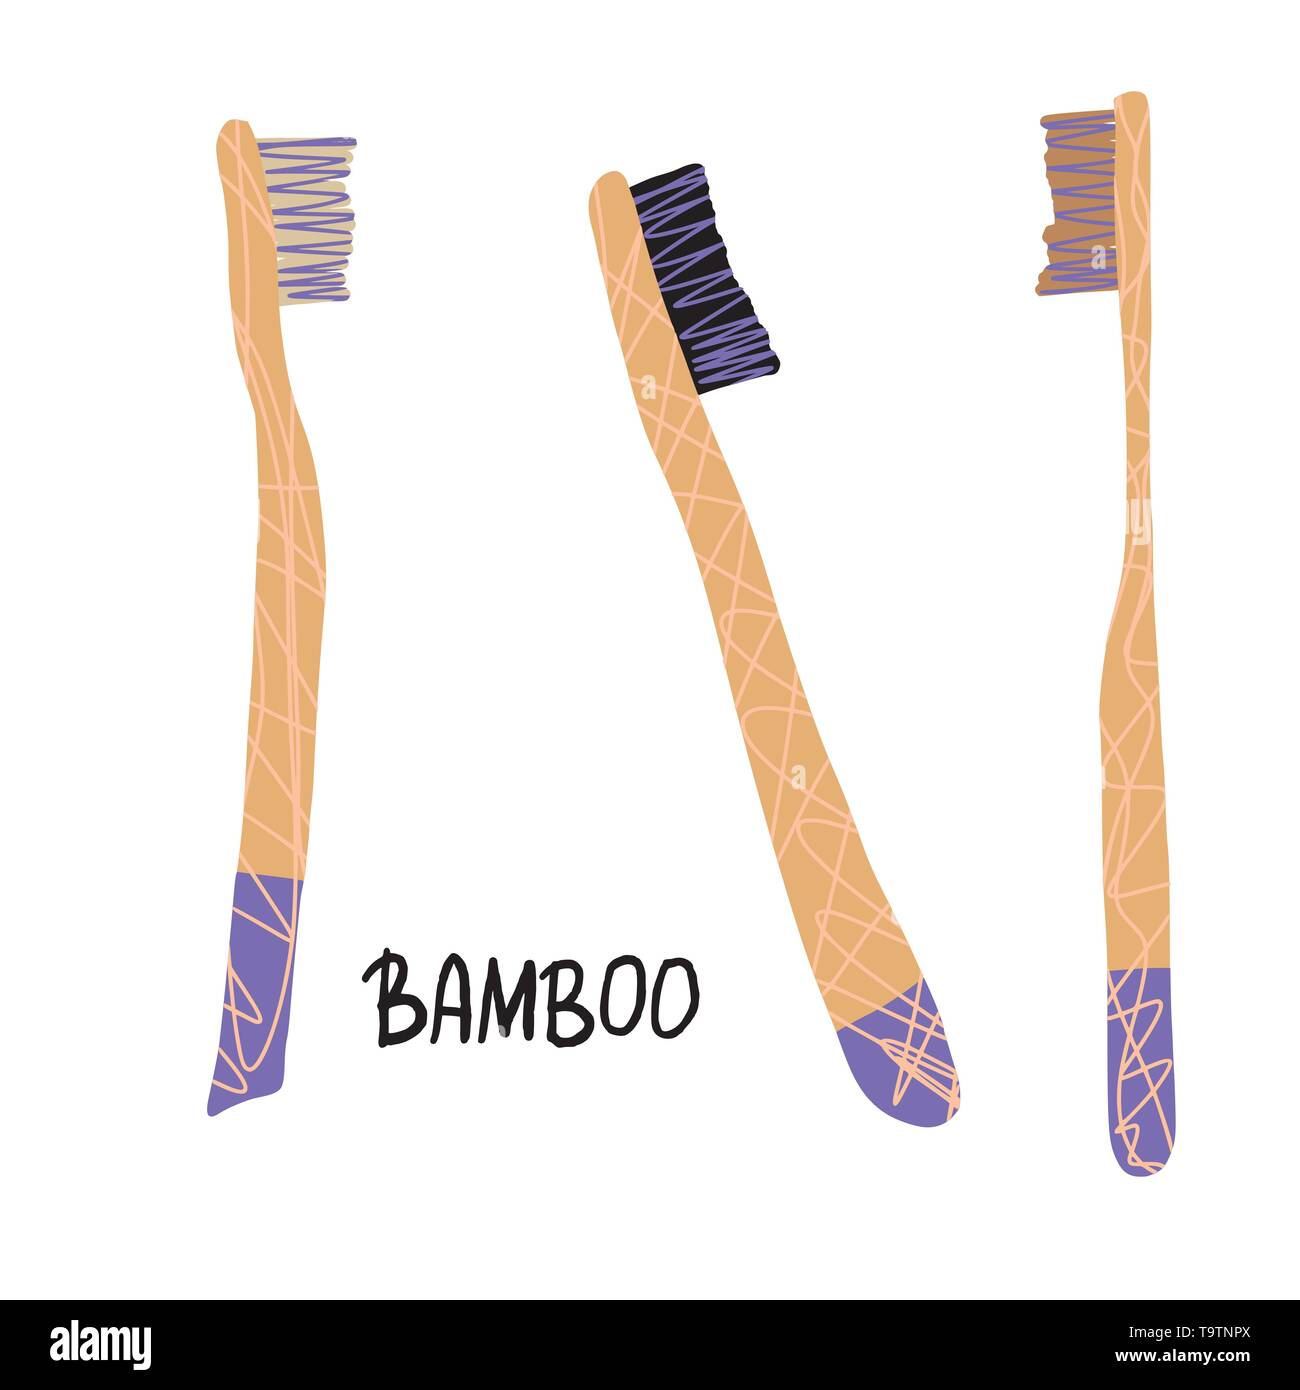 Bamboo toothbrushes set isolated. Zero waste tips. Eco-friendly brushes. Vector illustration. Stock Vector